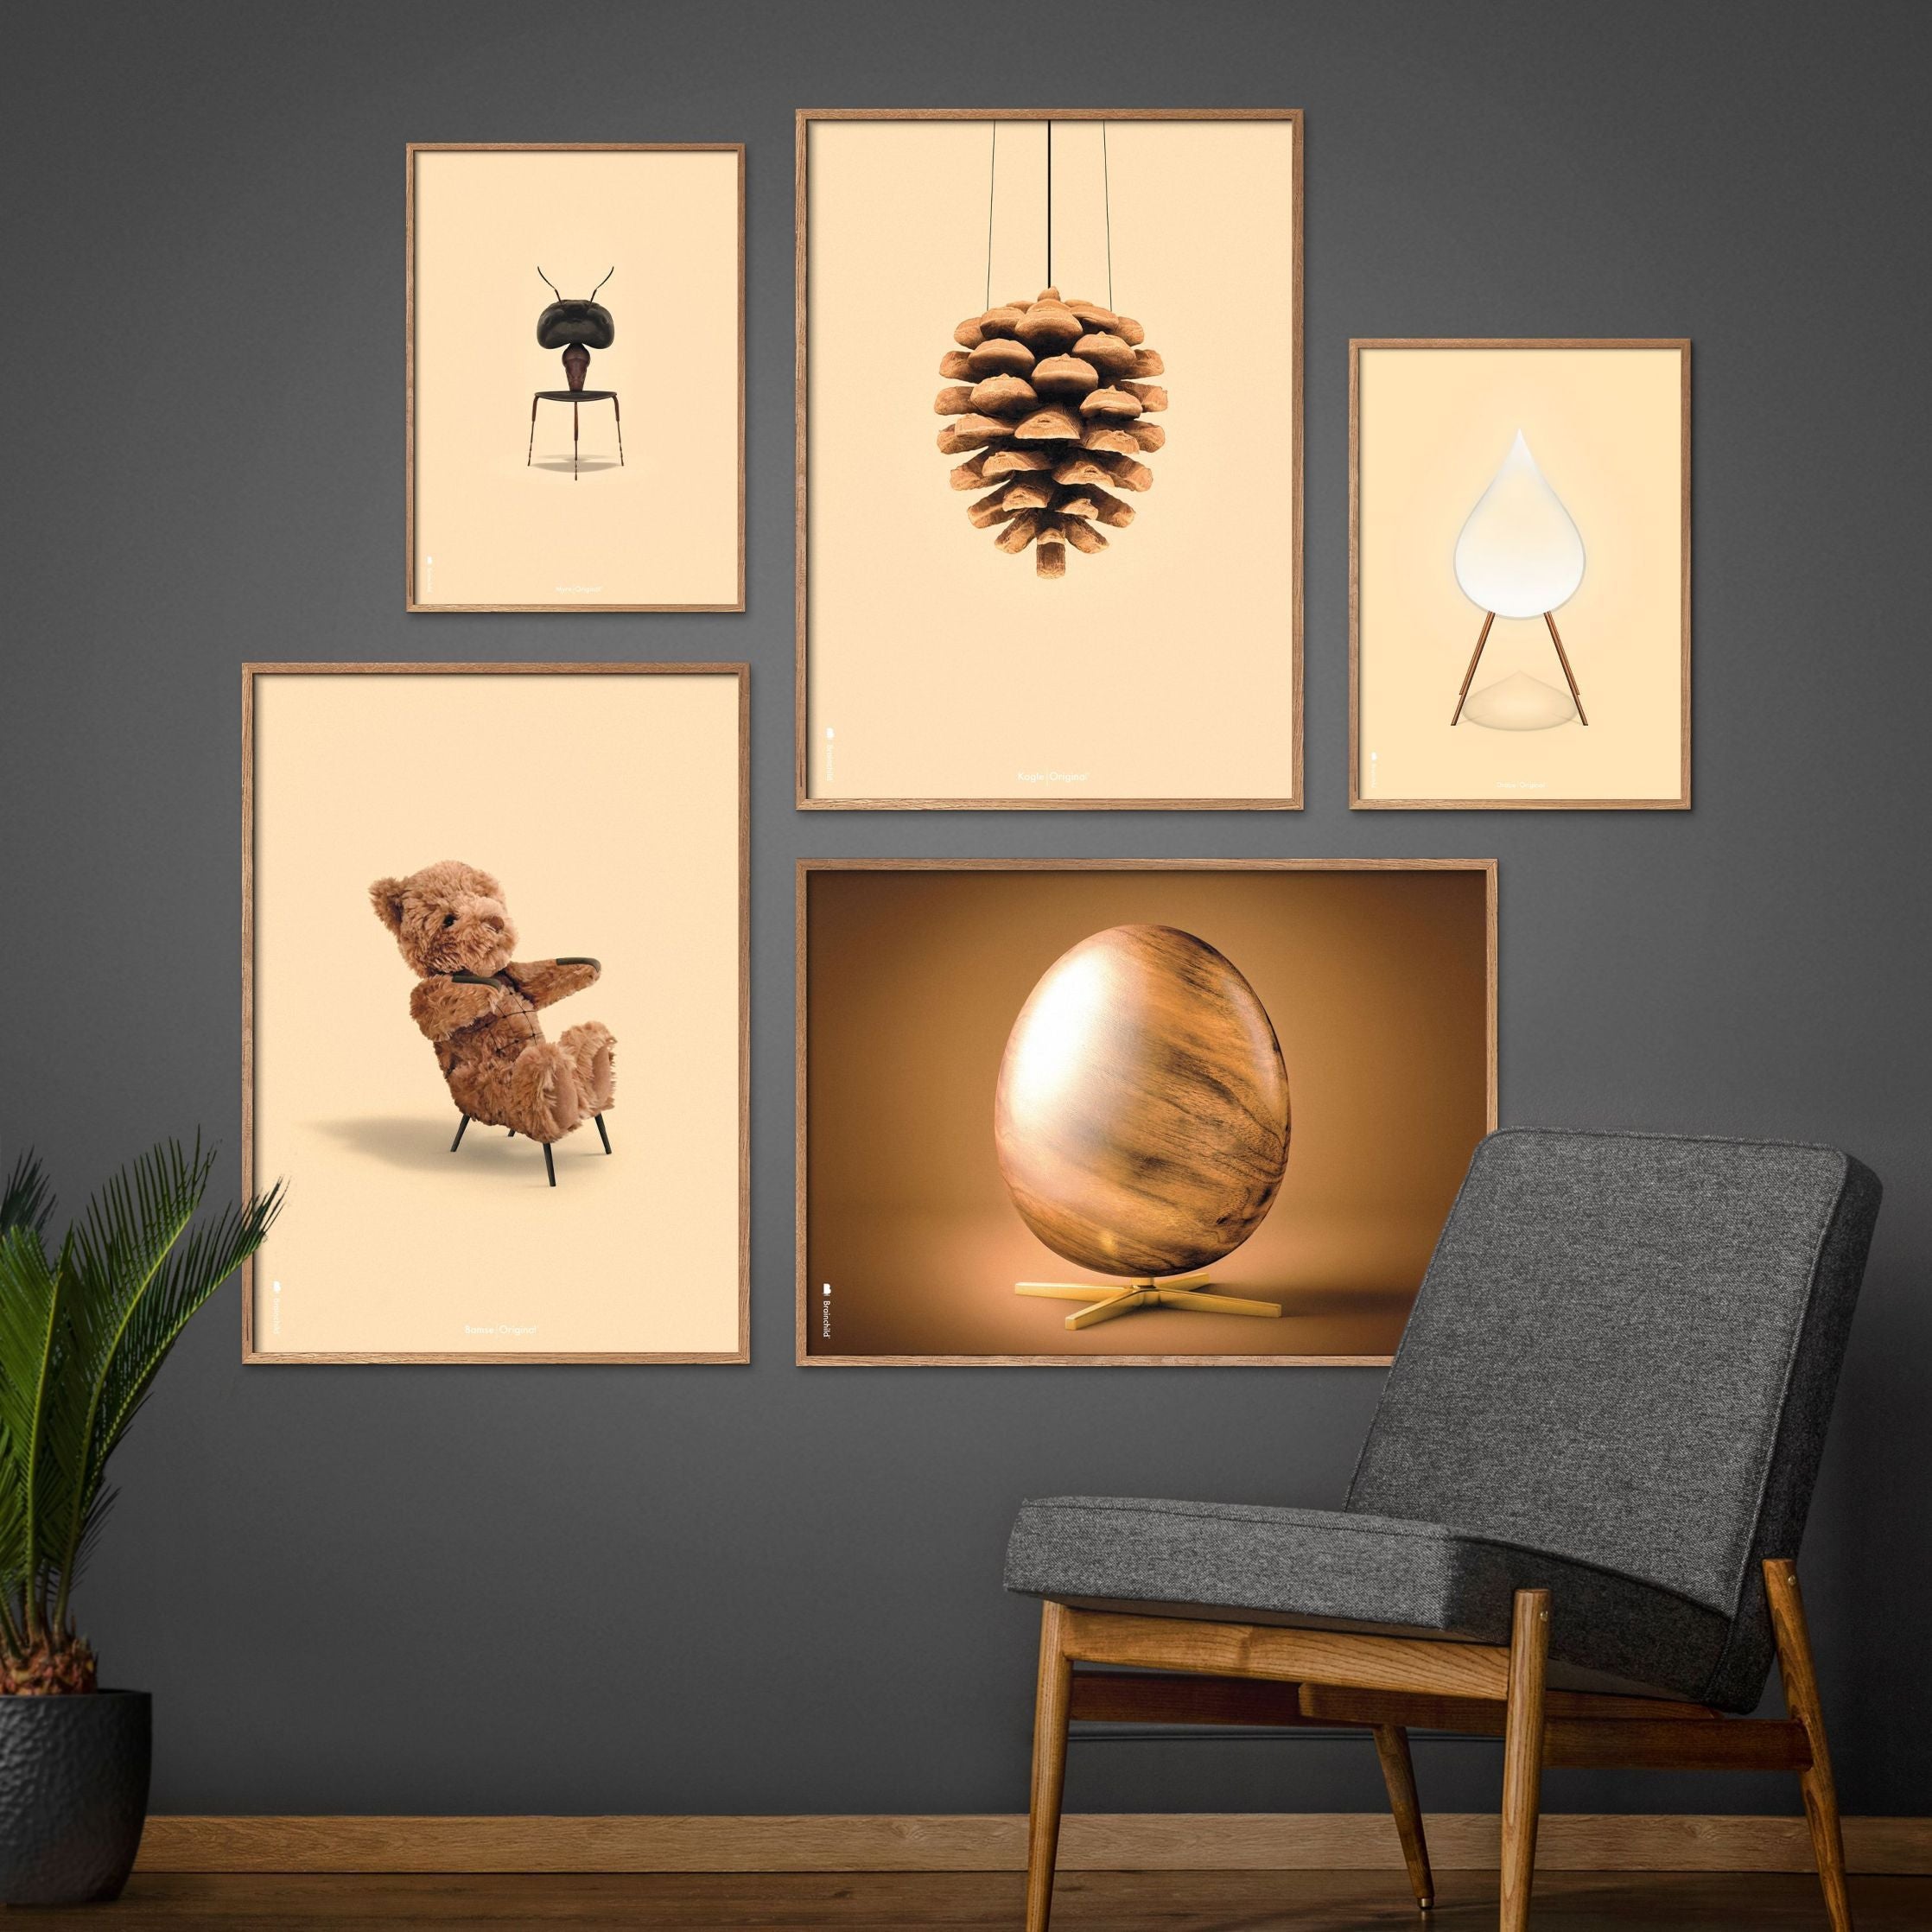 Brainchild Teddy Bear Classic Poster, Frame Made Of Light Wood A5, Sand Colored Background